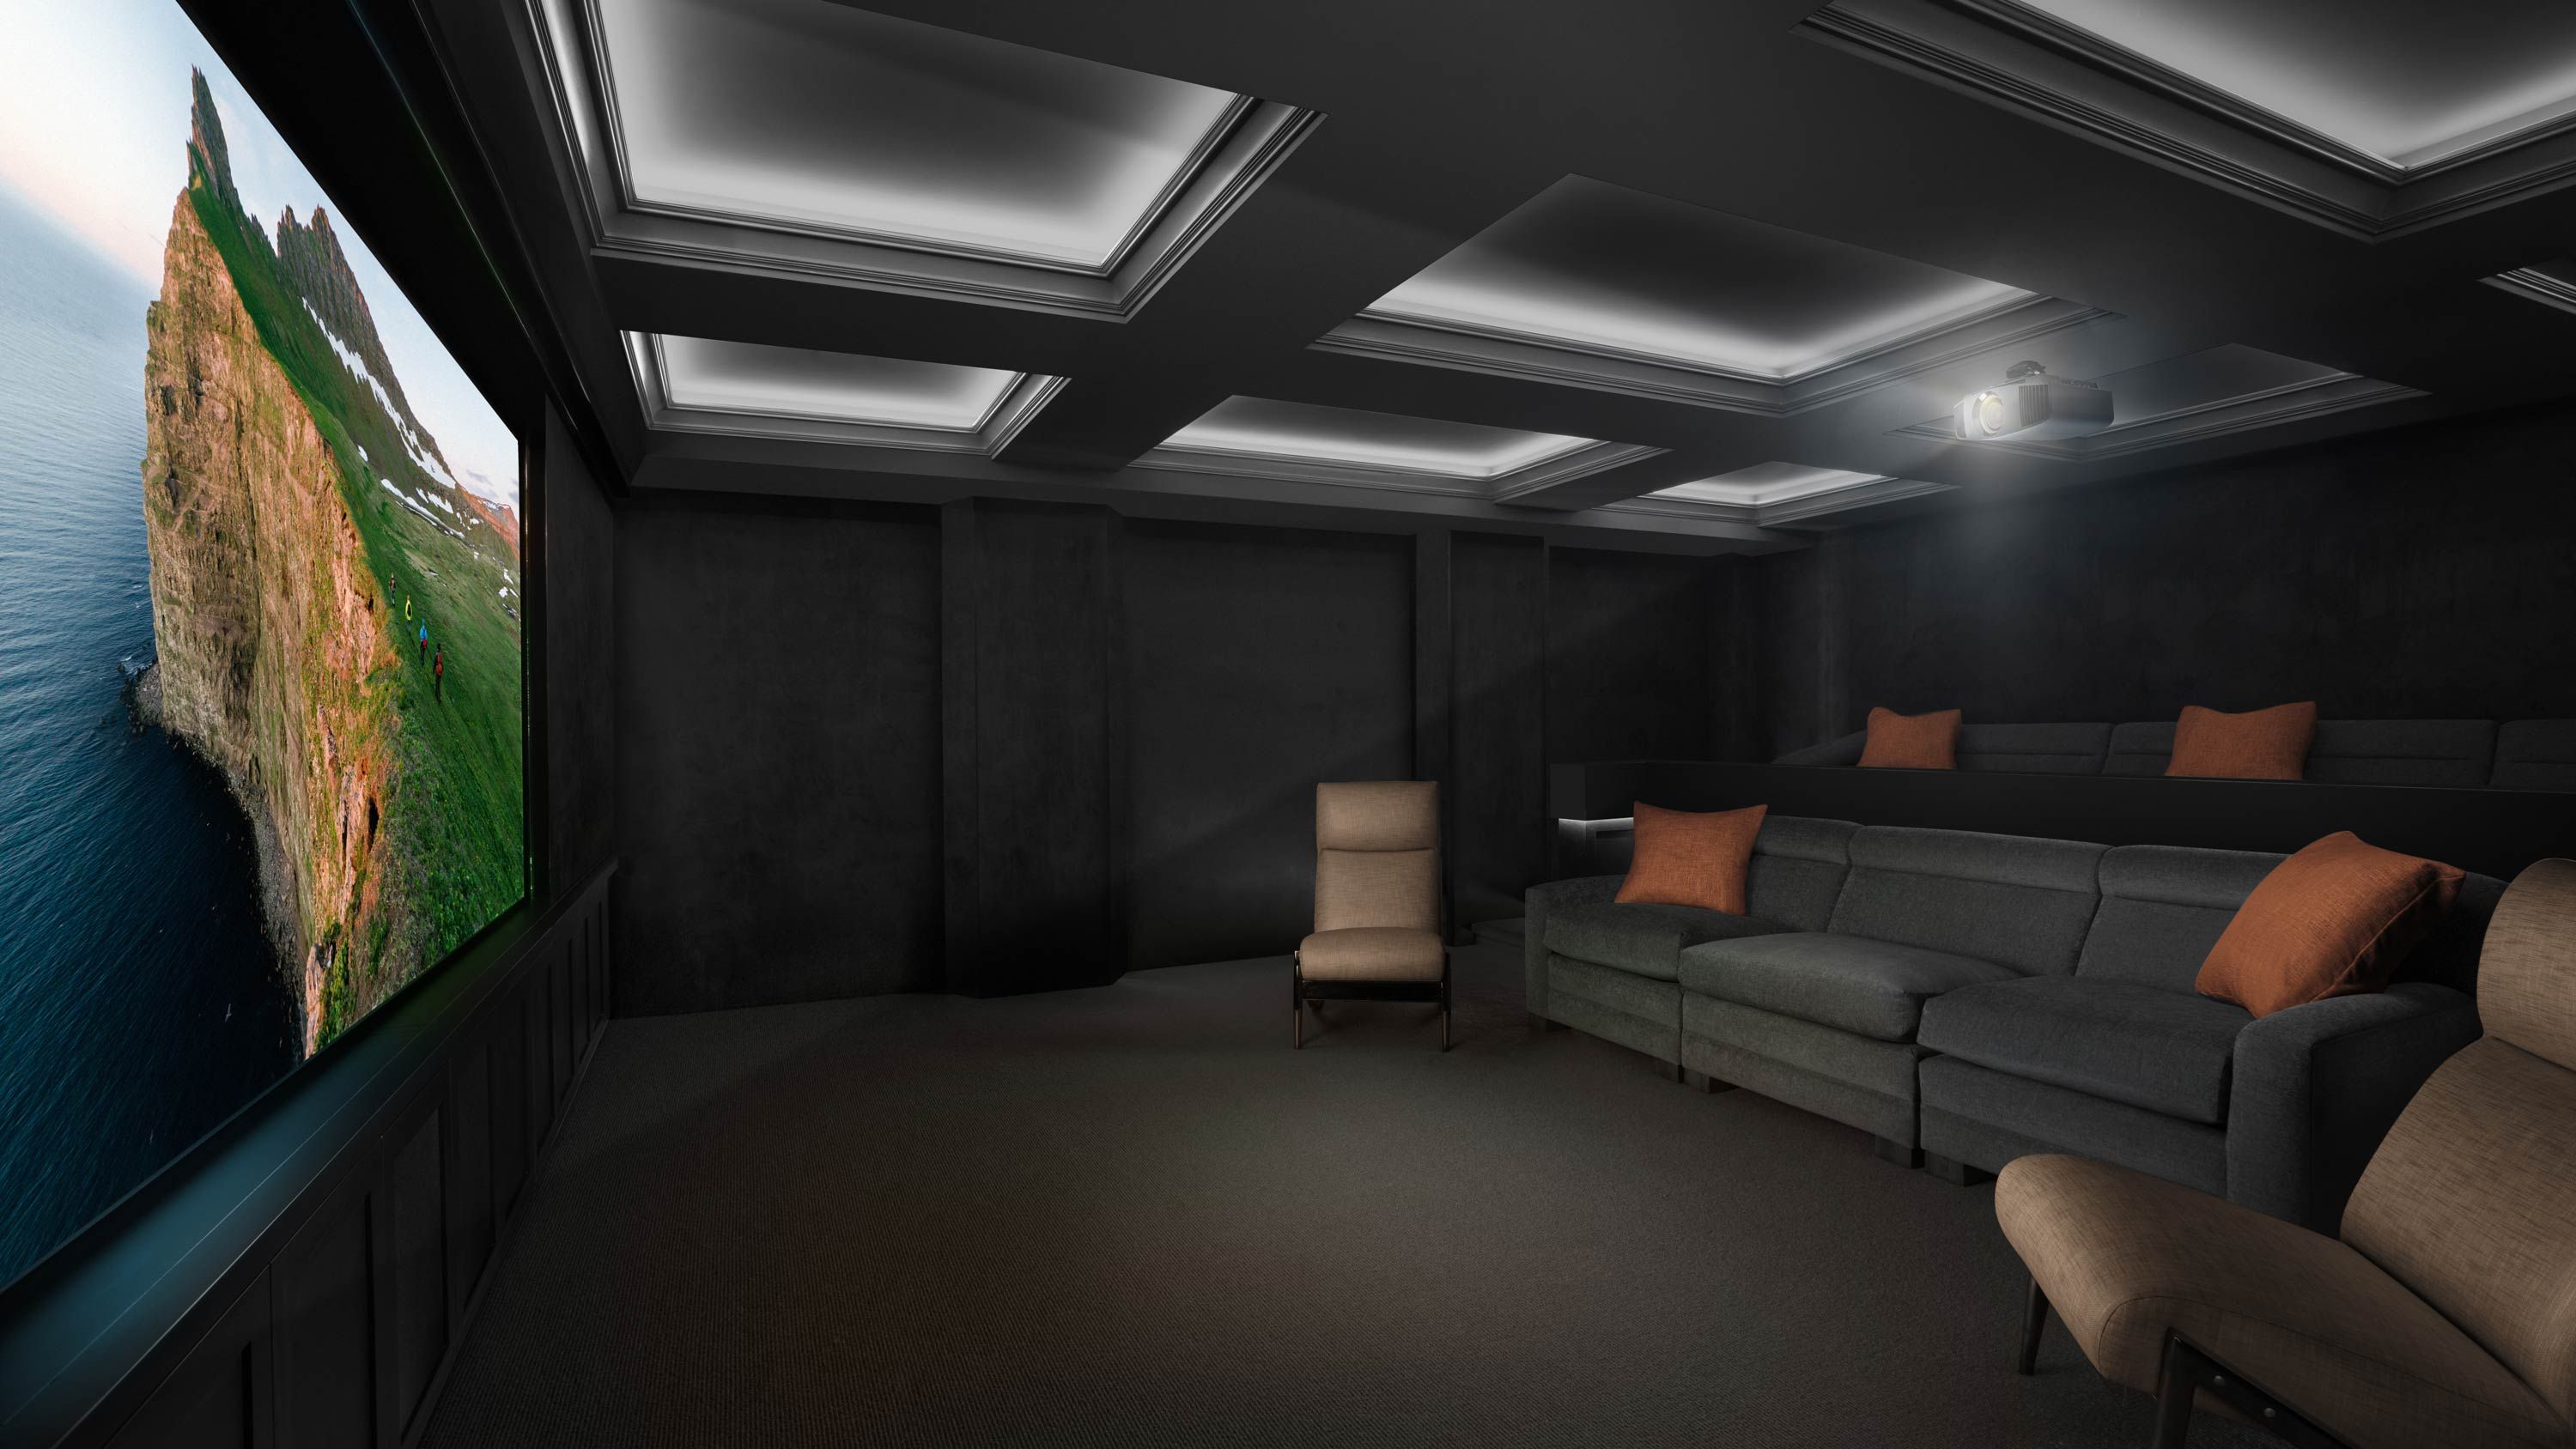 Sony Home theater with LED Lighting in the ceiling